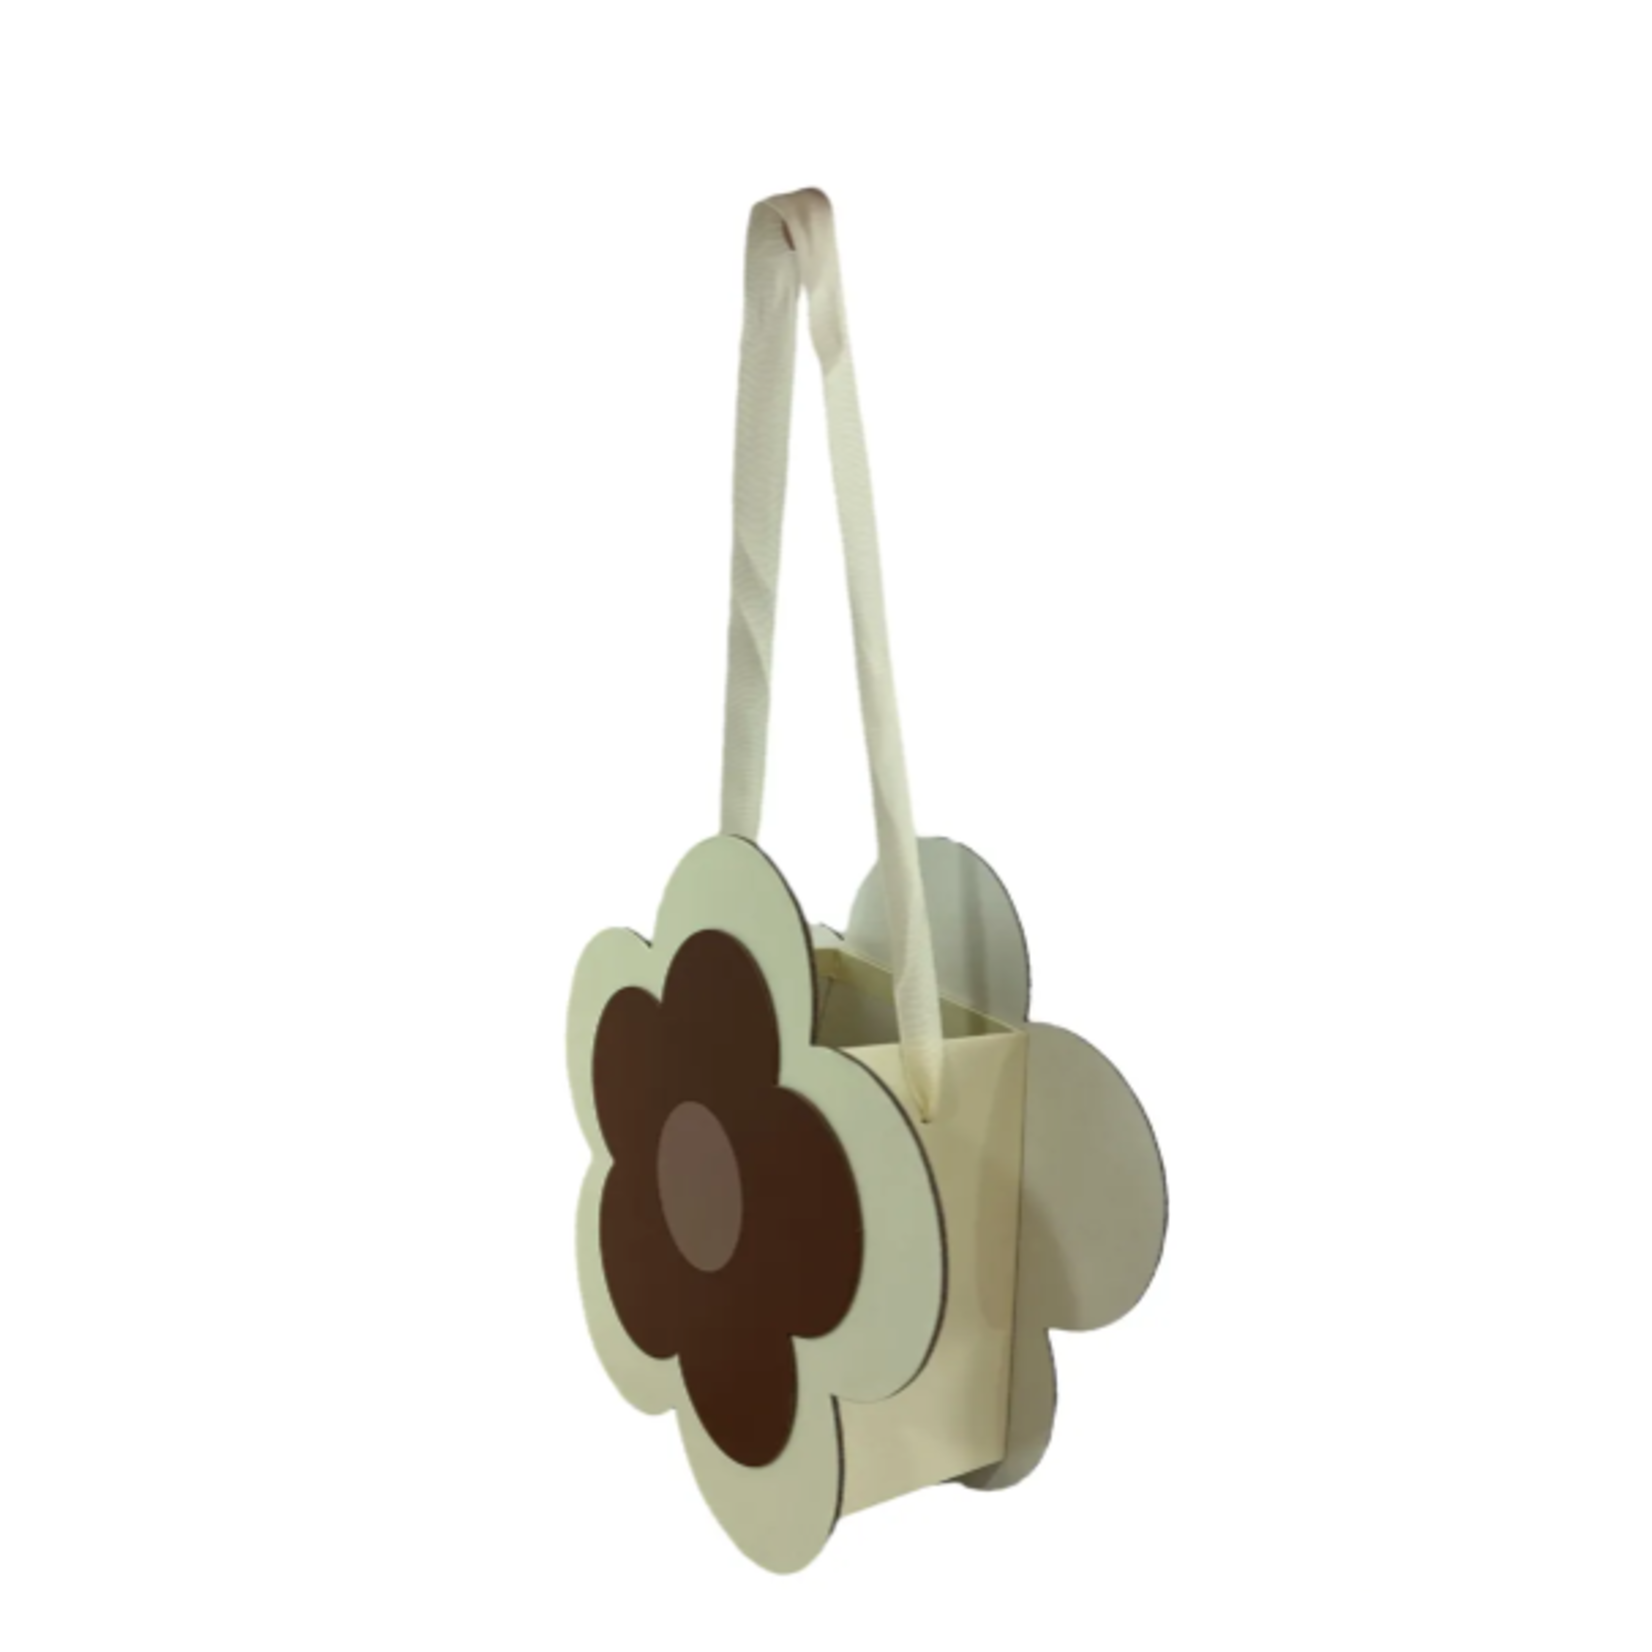 9.5" x 9.5" x 3.5" FLOWER IVORY BAG WITH BROWN FLOWER, NO DISCOUNT